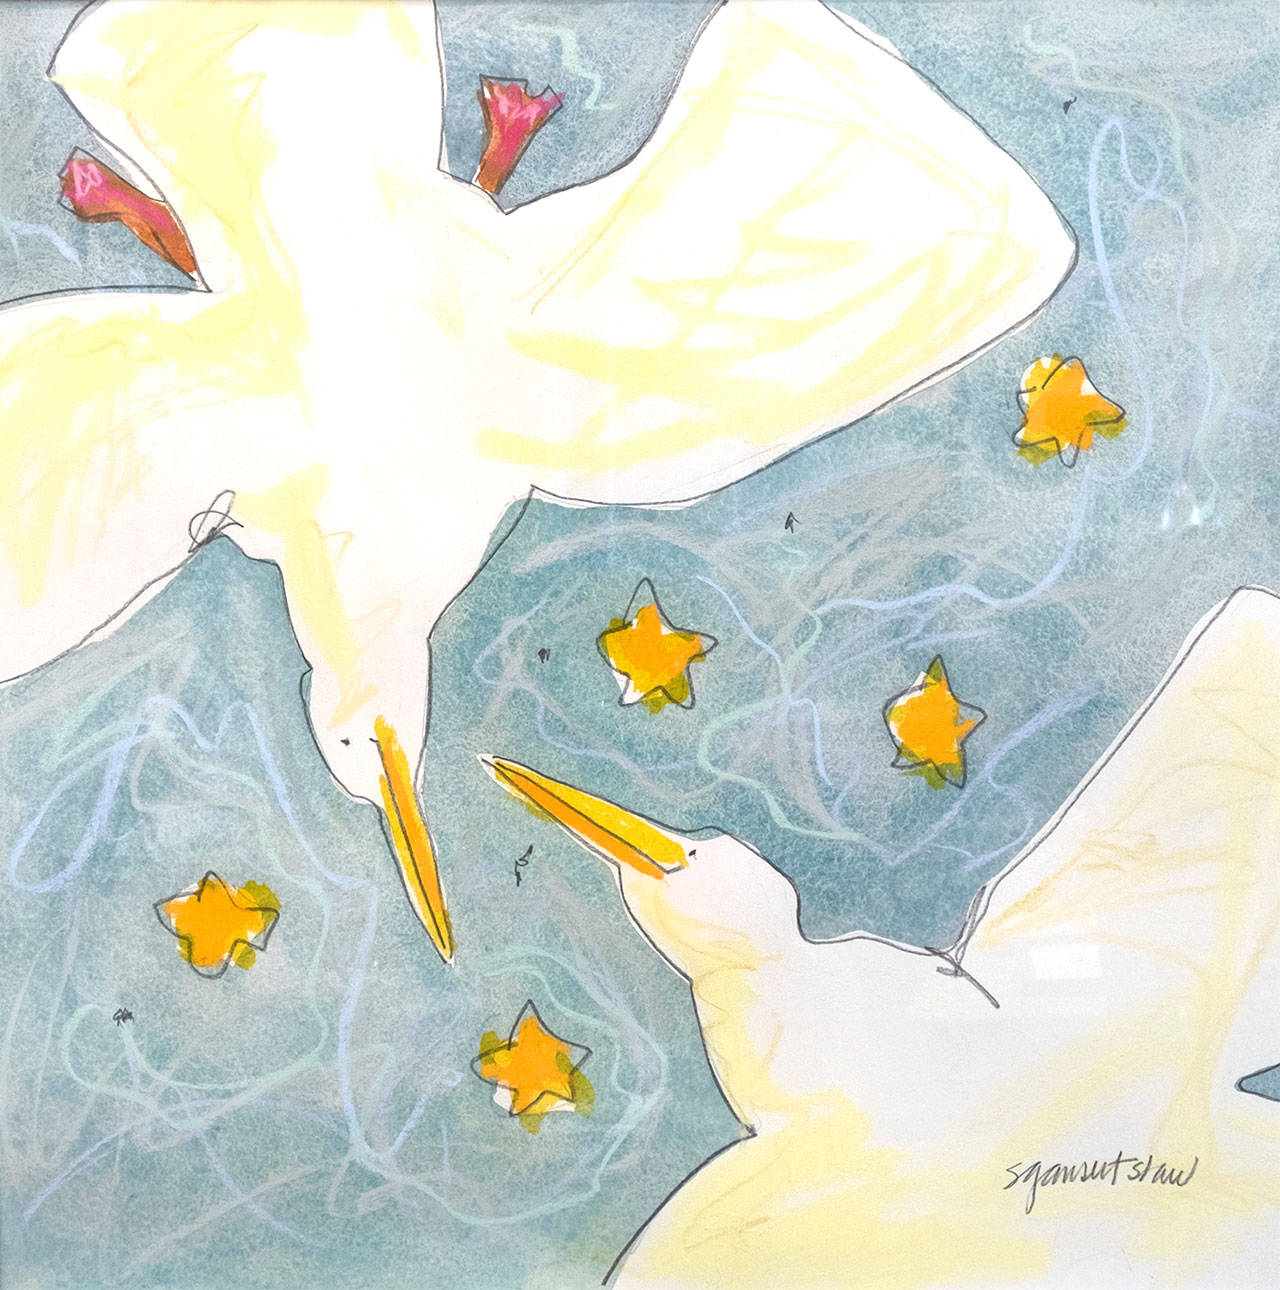 ”Joy Bird #2” by Susan Gansert Shaw, a featured artist on the City of Sequim’s art commission new blog. Submitted art